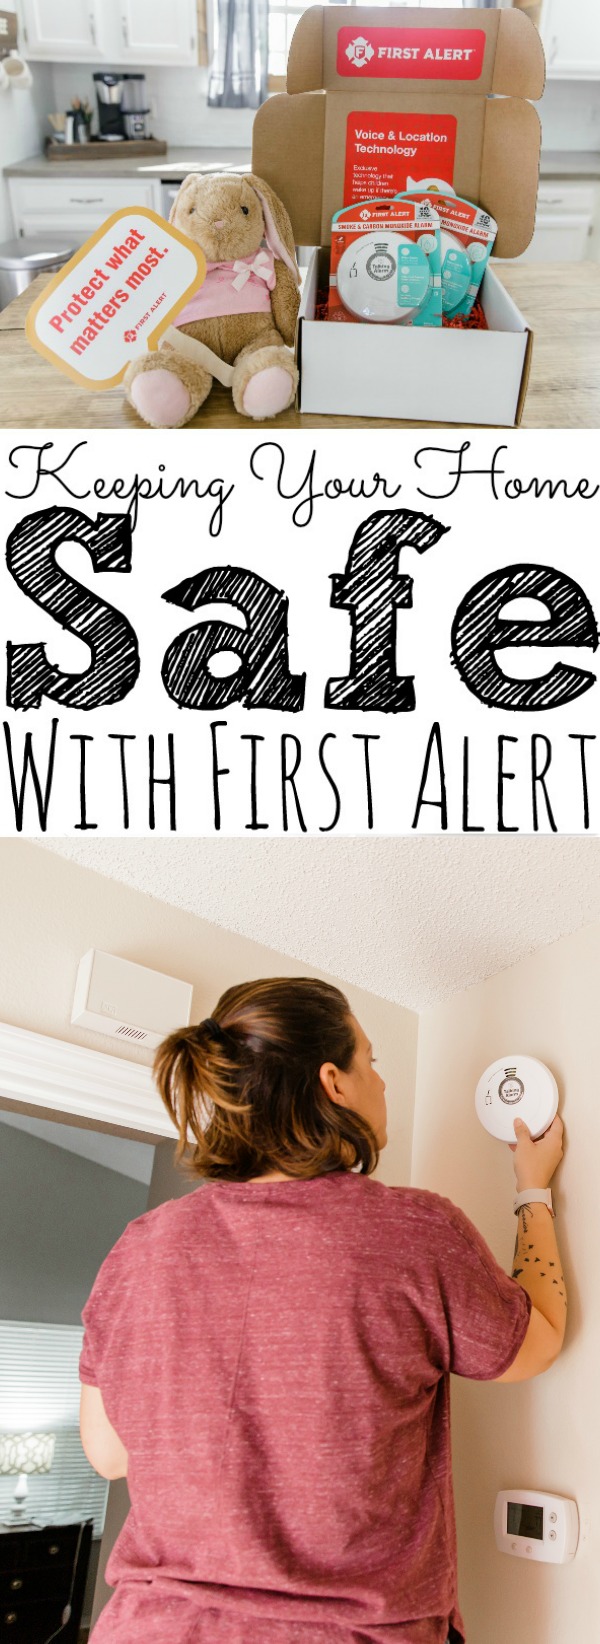 How To Keep Your Family and Home Safe with First Alert